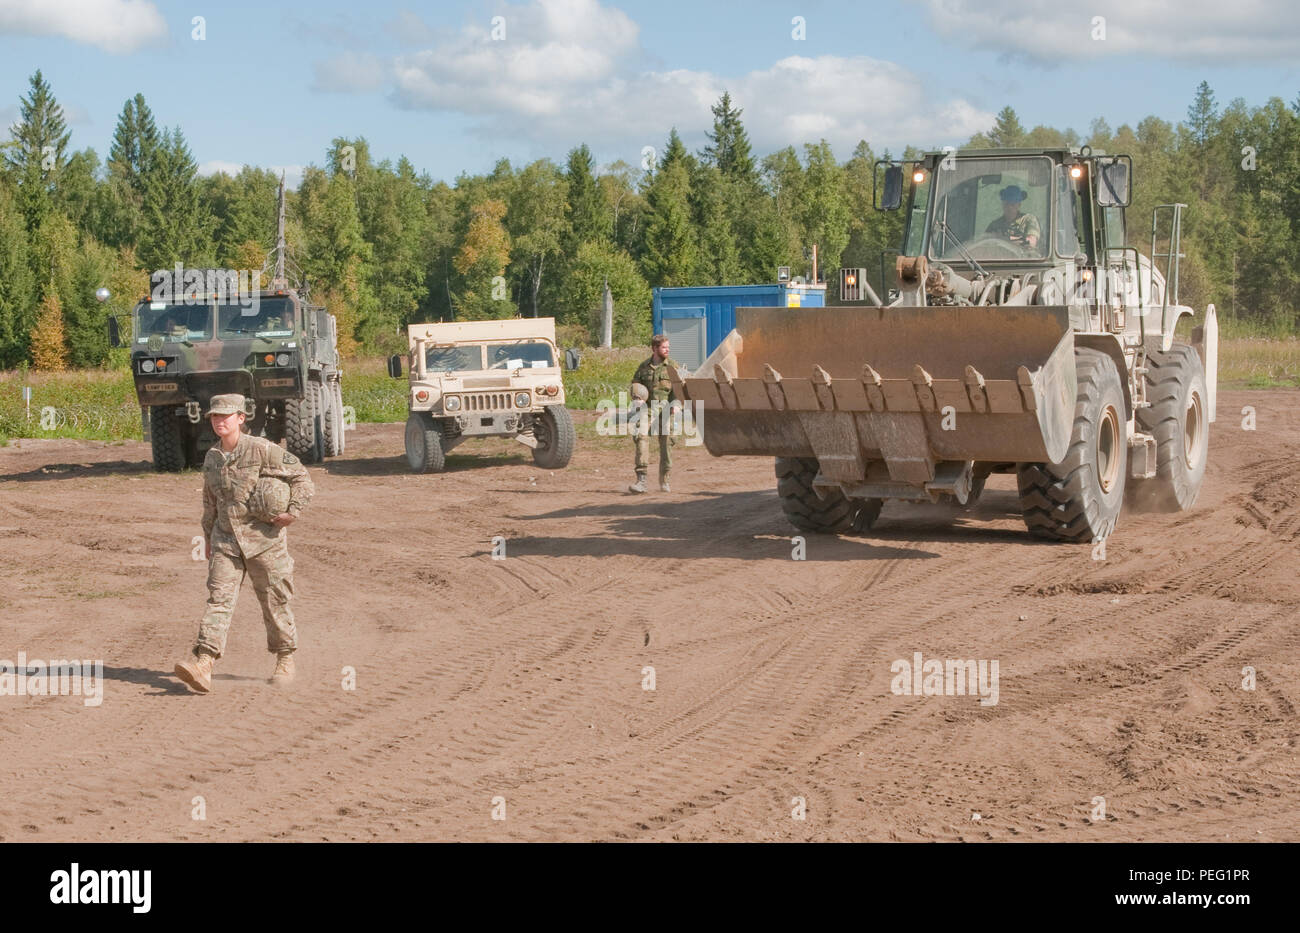 Pfc. Paola Mata, of Dallas, a heavy equipment operator with 500th Engineer Company, 15th Engineer Battalion, 18th Military Police Brigade based out of Grafenwoehr, Germany, ground guides Enlisted Jonas Sundberg, of Moss, Norway, an engineer with the Theater Enabling Force of the Norwegian Army High Readiness Force to a gravel mound near a road construction Aug. 19, at the Central Training Area near Tapa, Estonia. The efforts are a part of Operation Atlantic Resolve, an ongoing series of training operations and events designed to build relationships, trust and interoperability between the U.S.  Stock Photo